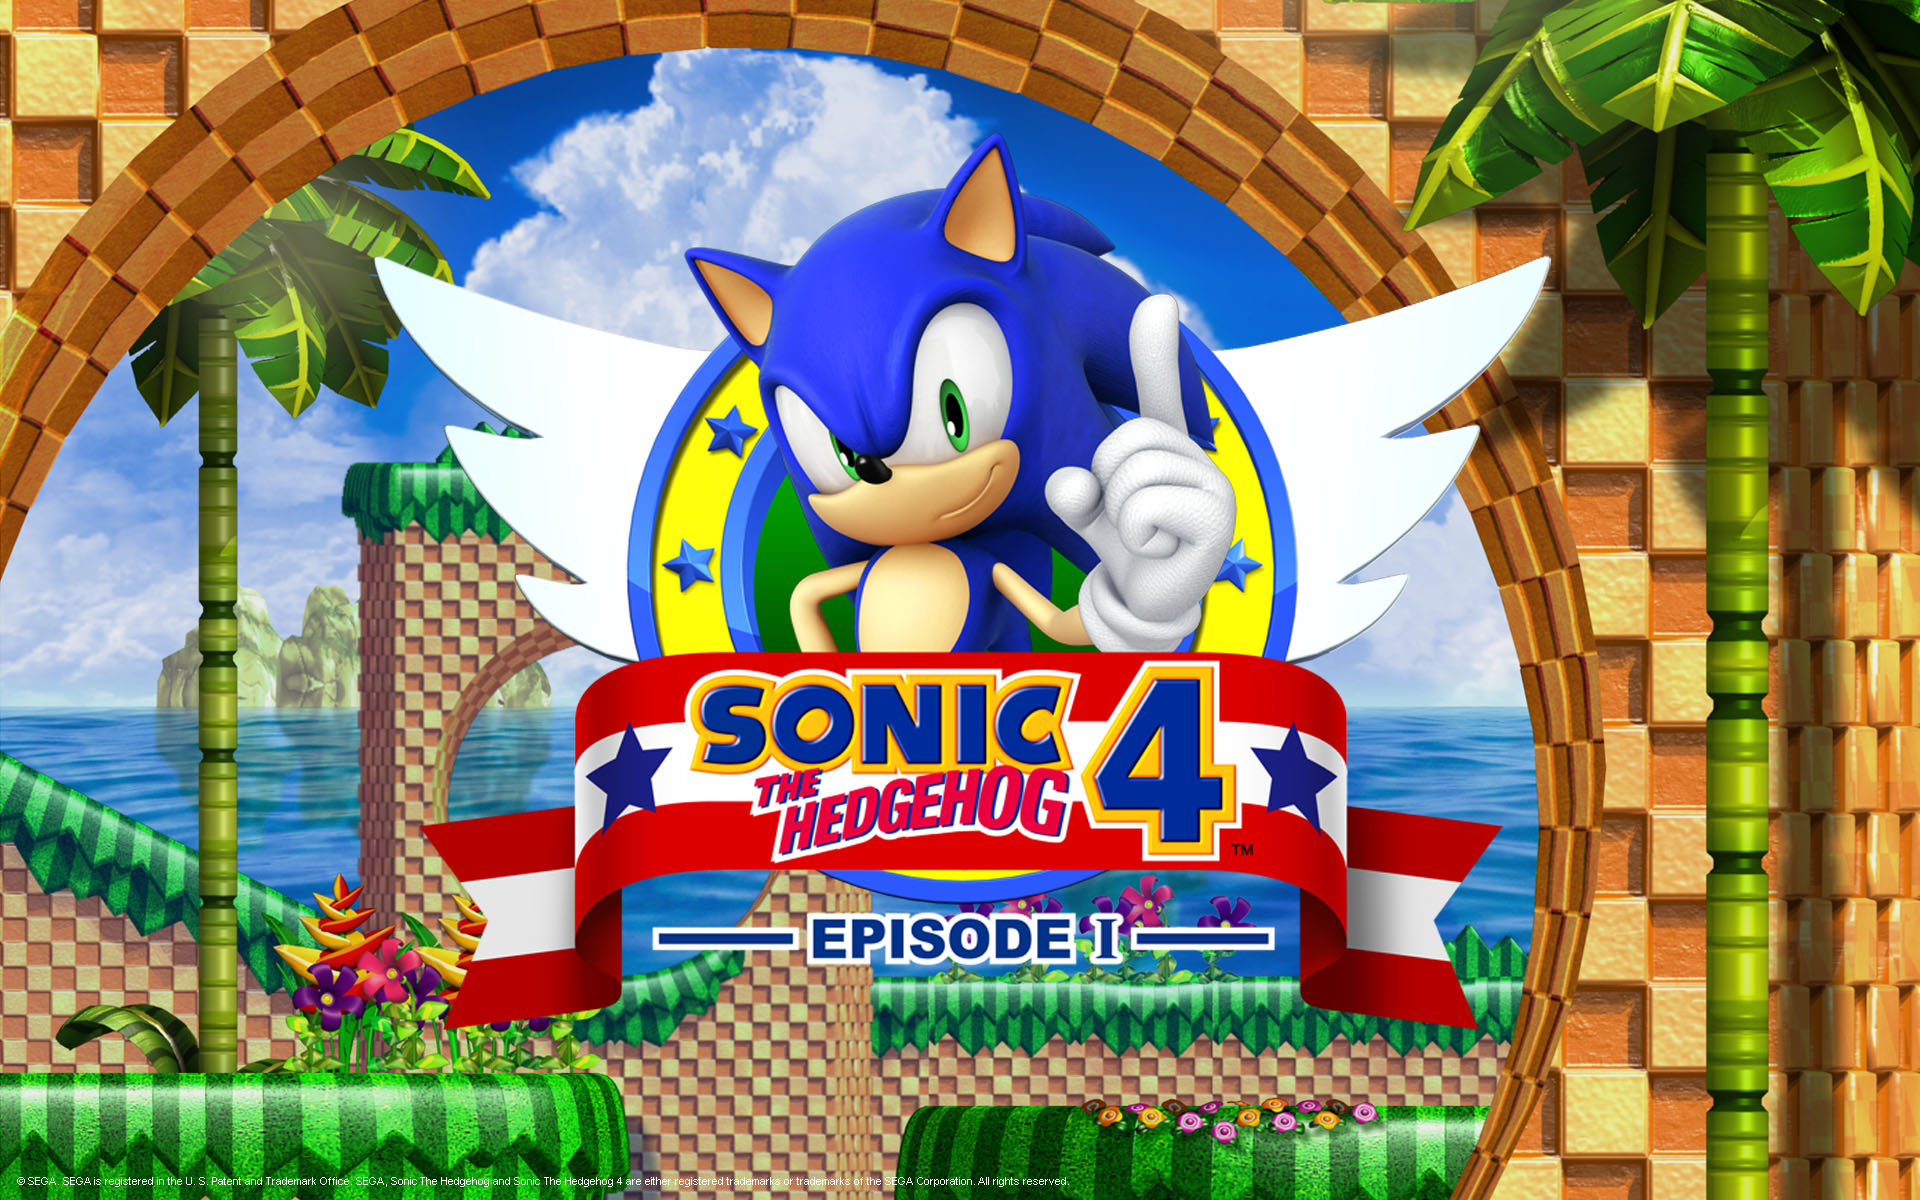 Sonic The Hedgehog 4 Episode 1 Wallpaper - Sonic The Hedgehog 4 Episode 1 Wii , HD Wallpaper & Backgrounds